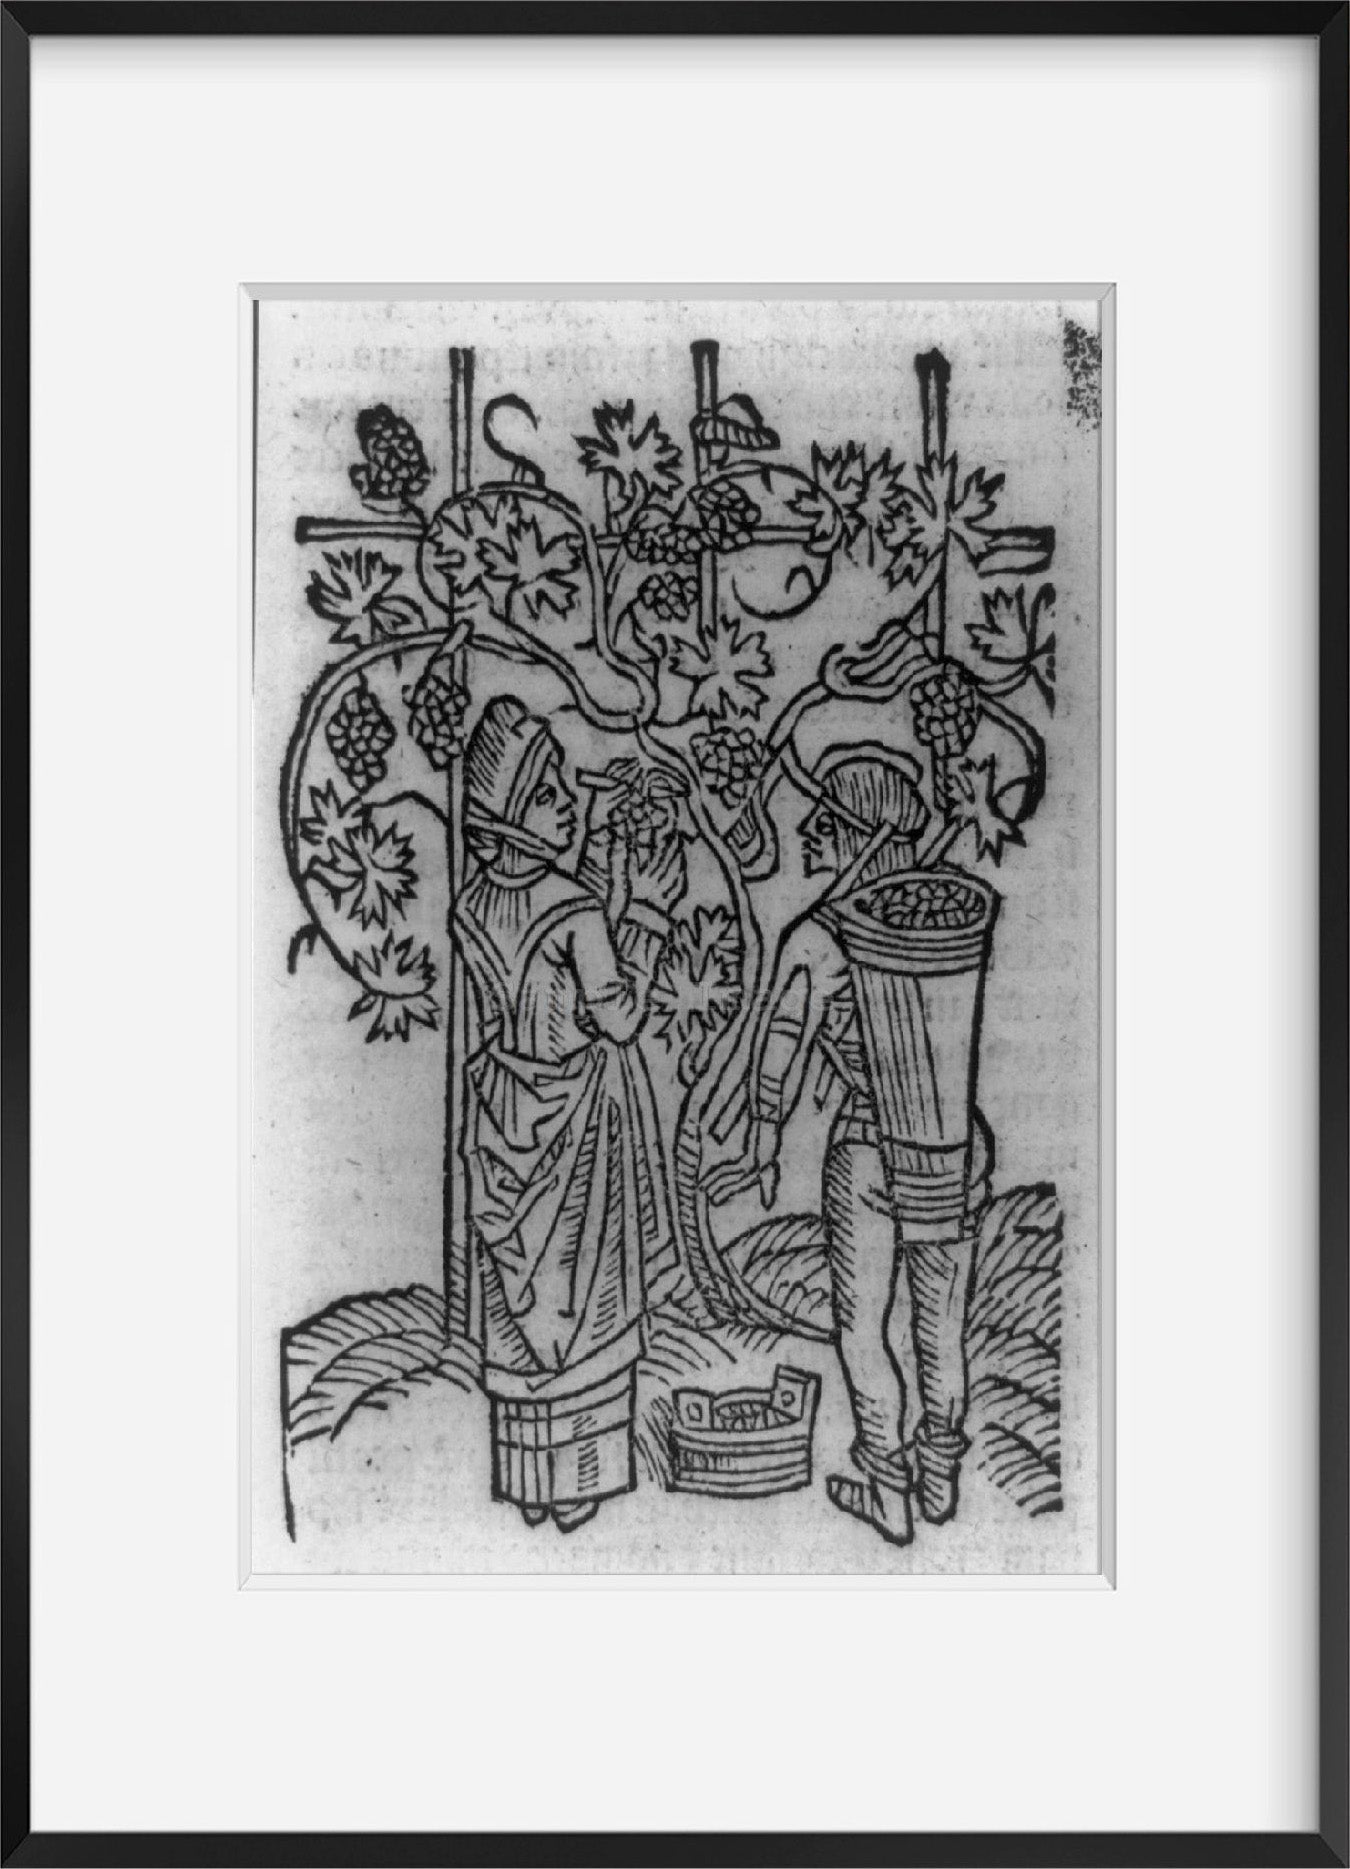 Vintage 1493 print: Viticultural scenes - man and woman picking grapes